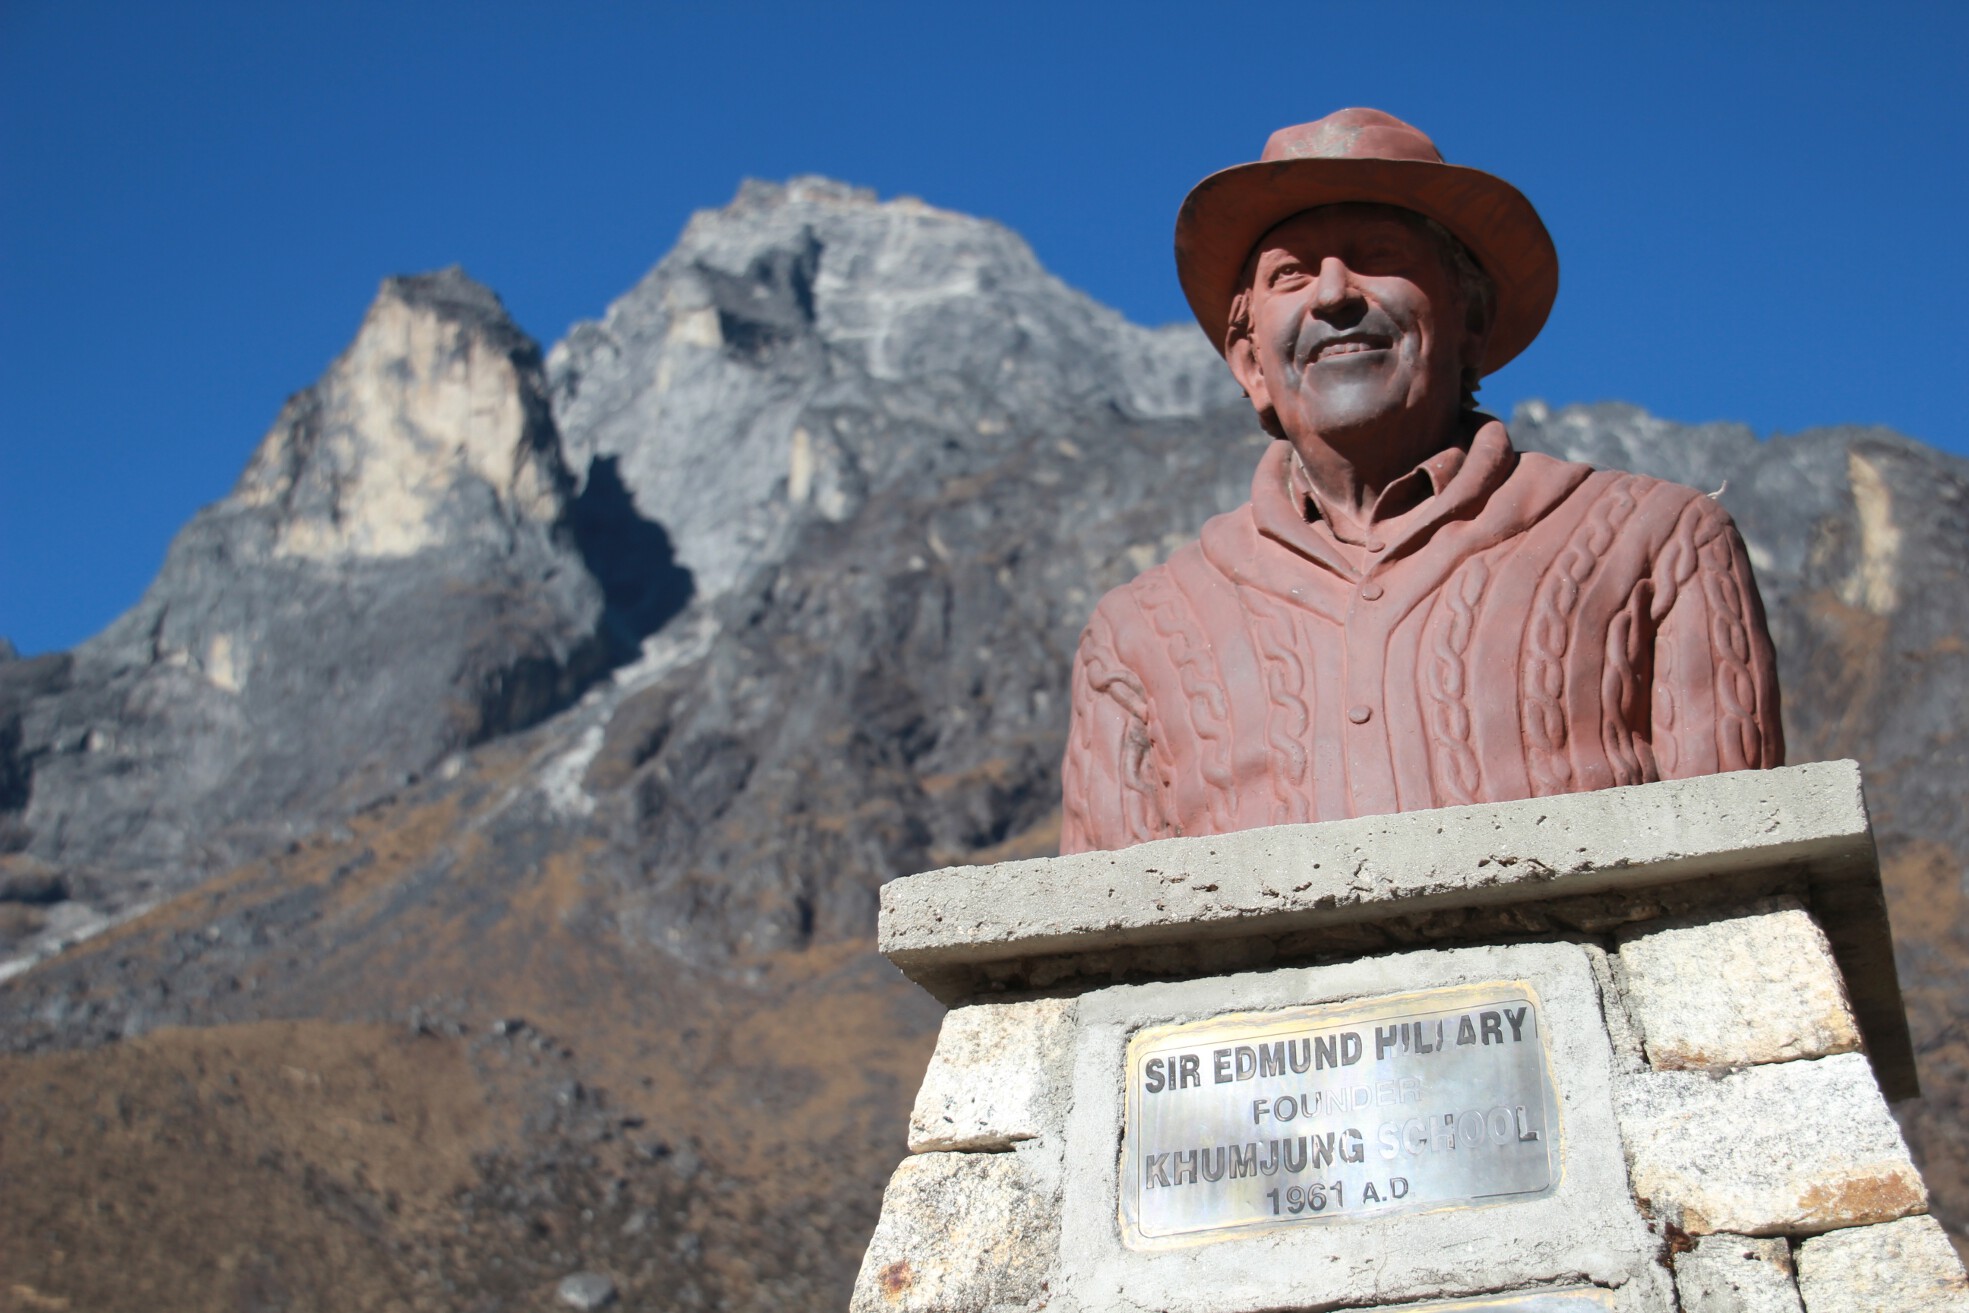 A statue of Sir Edmund Hillary stands in Khumjung, Nepal.